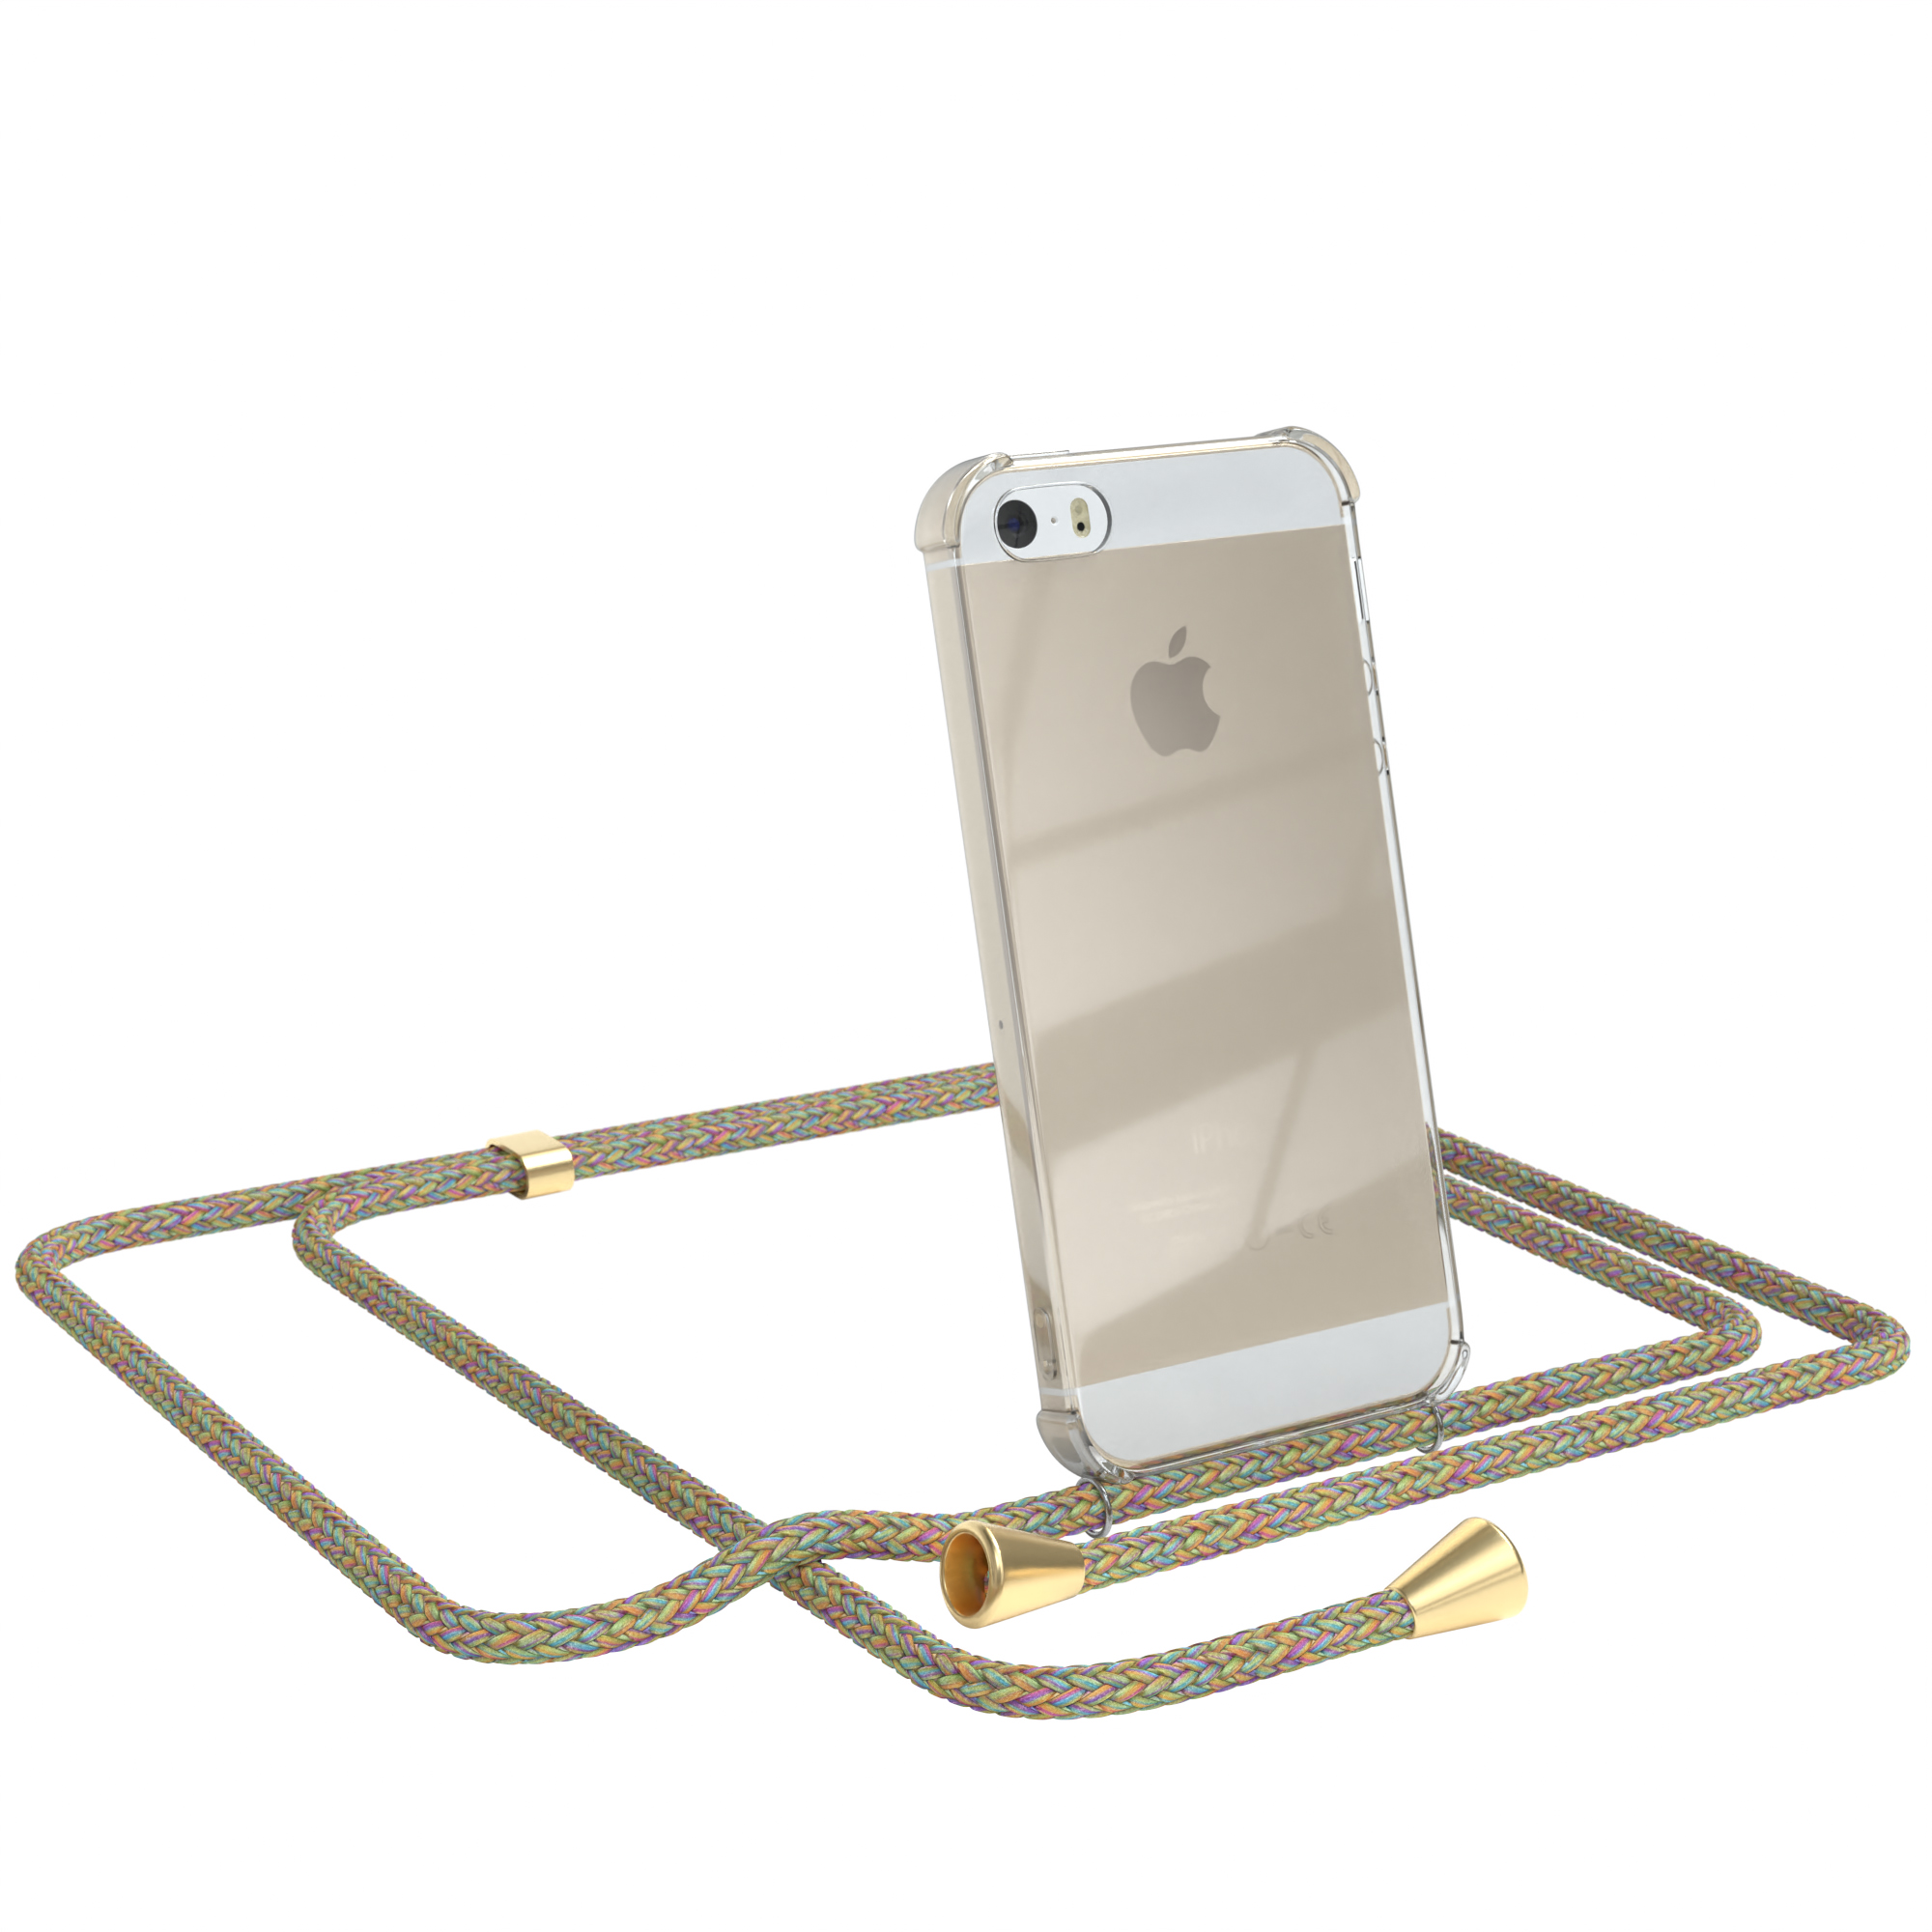 SE 2016, Umhängetasche, Clear Apple, CASE mit / Gold 5S, Umhängeband, Bunt iPhone iPhone EAZY 5 Clips / Cover